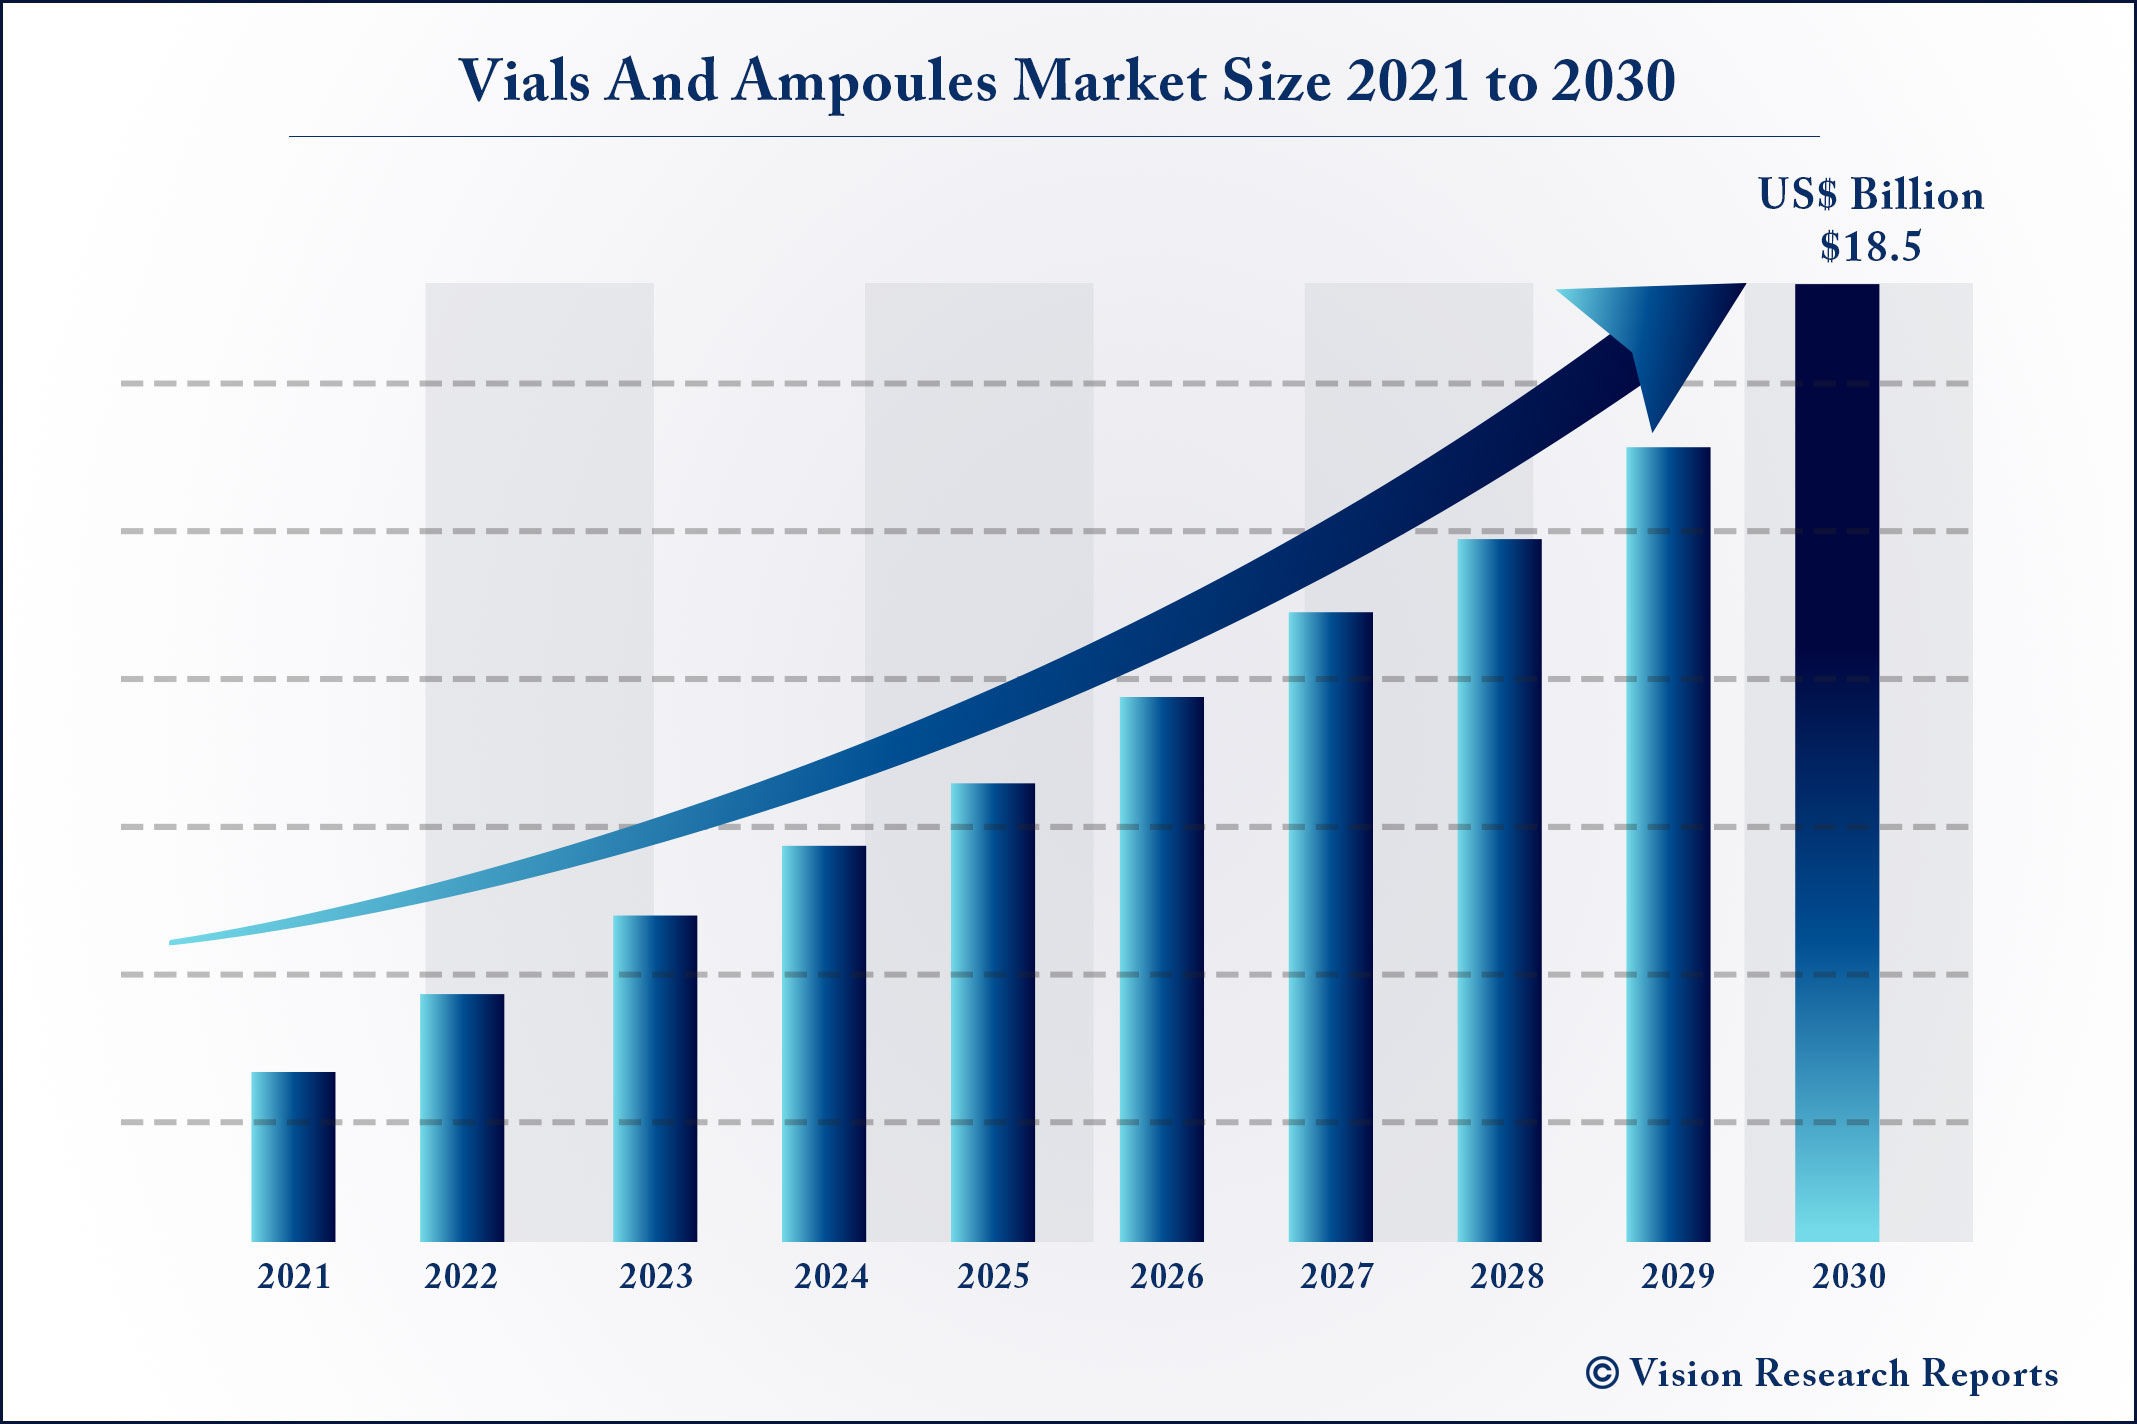 Vials And Ampoules Market Size 2021 to 2030